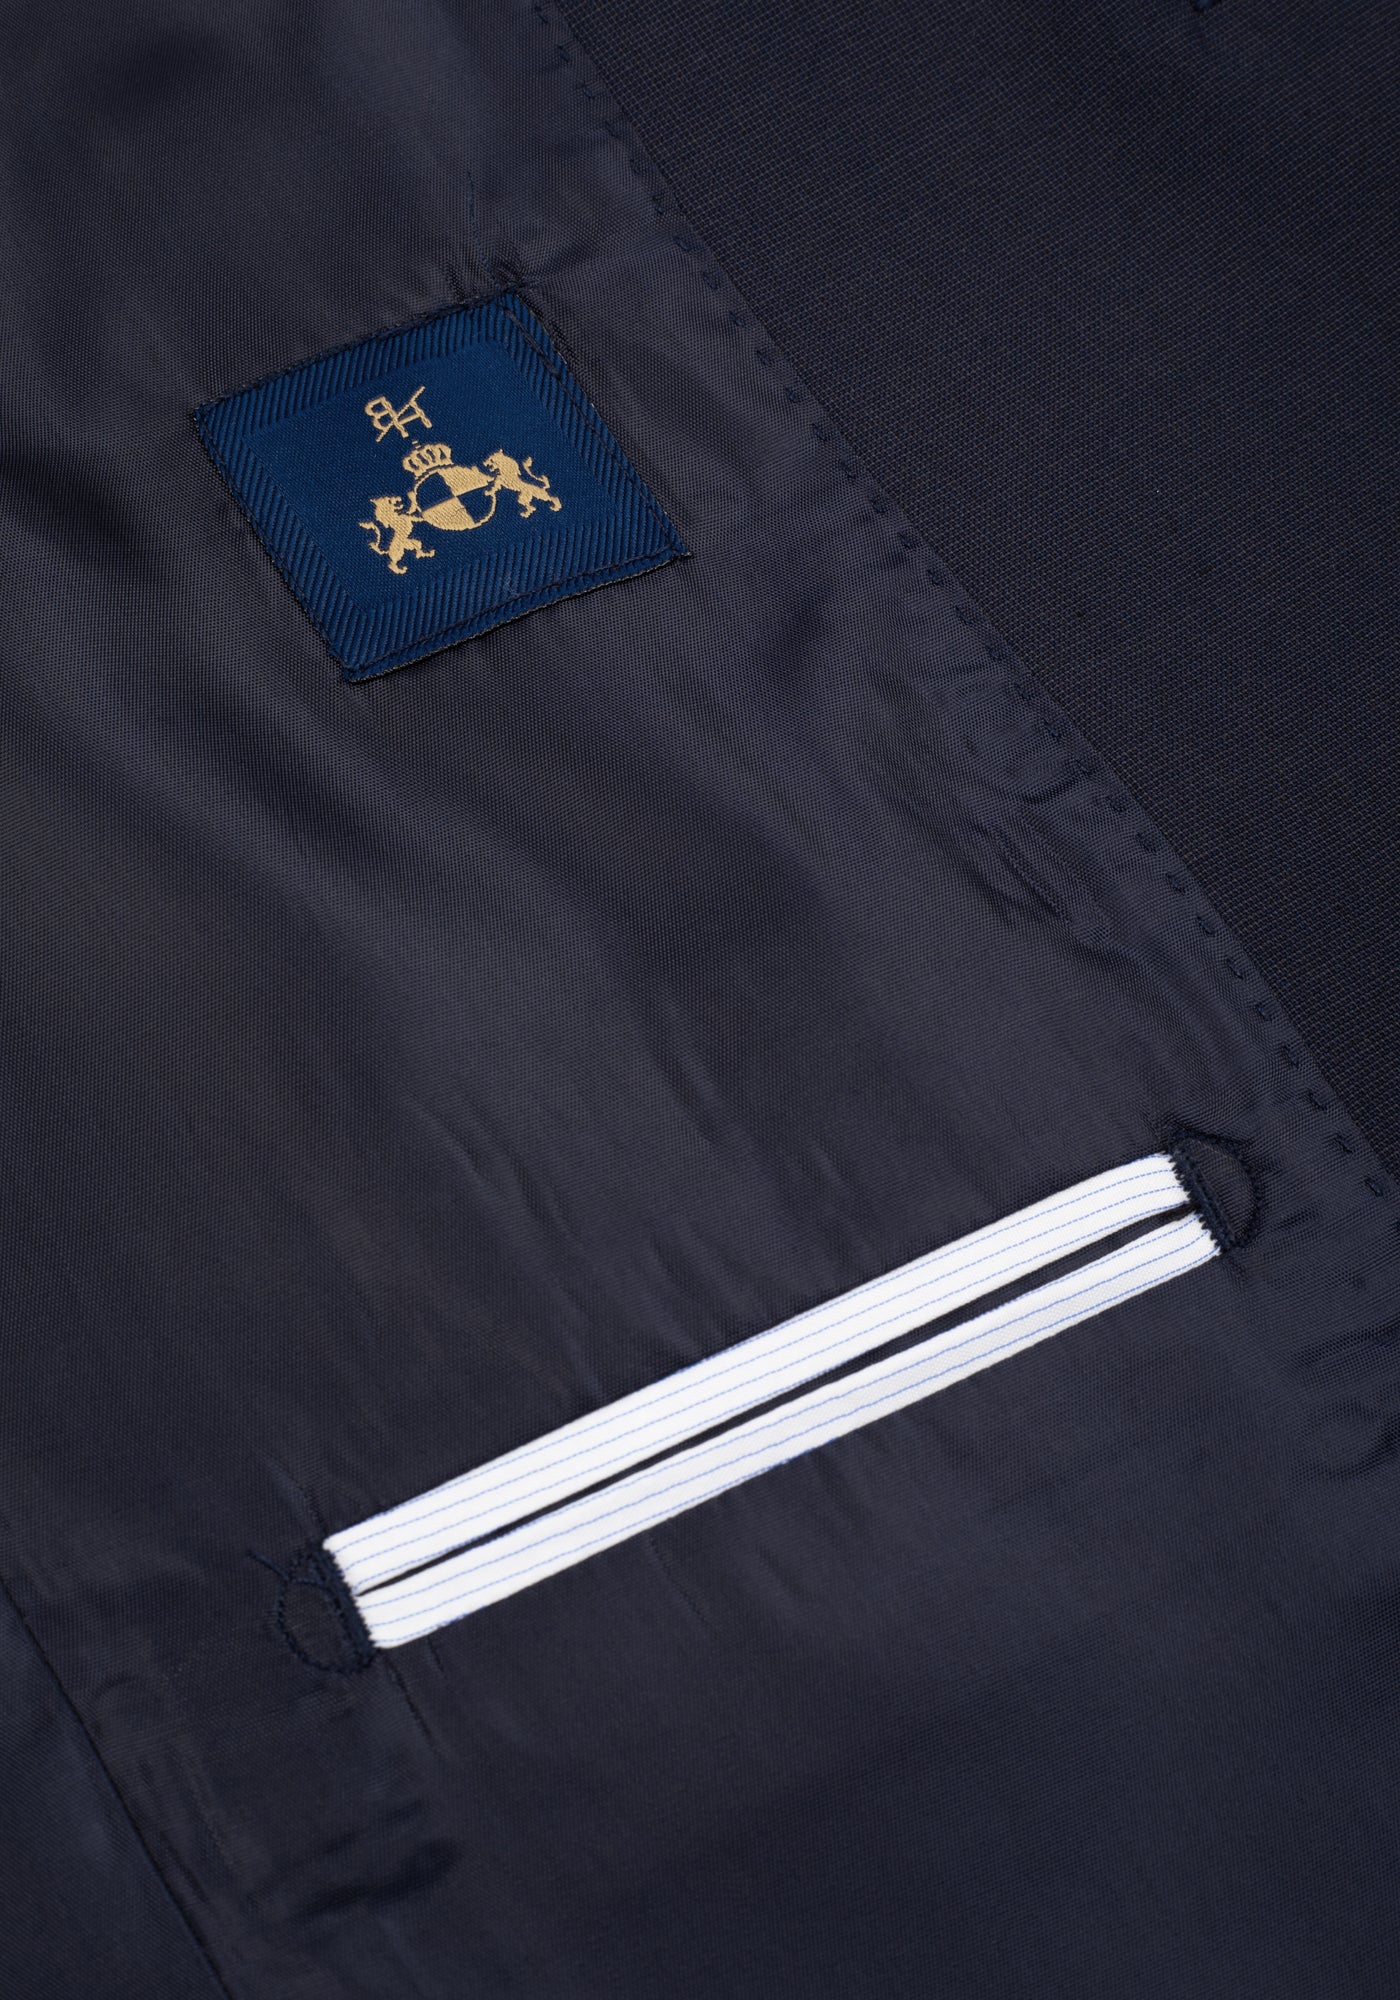 Dim Faded Navy Poly Suit